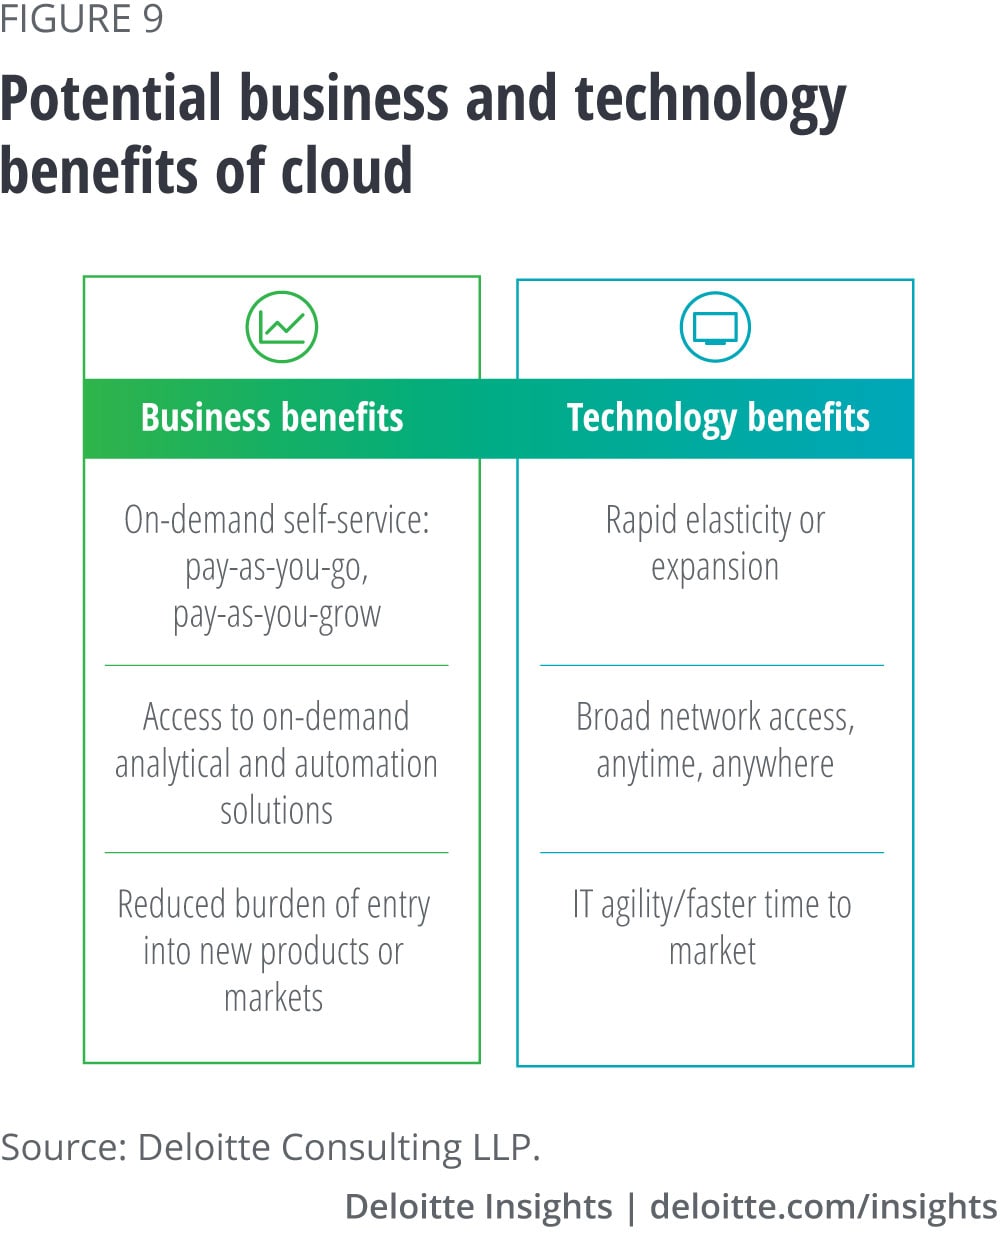 Potential business and technology benefits of cloud